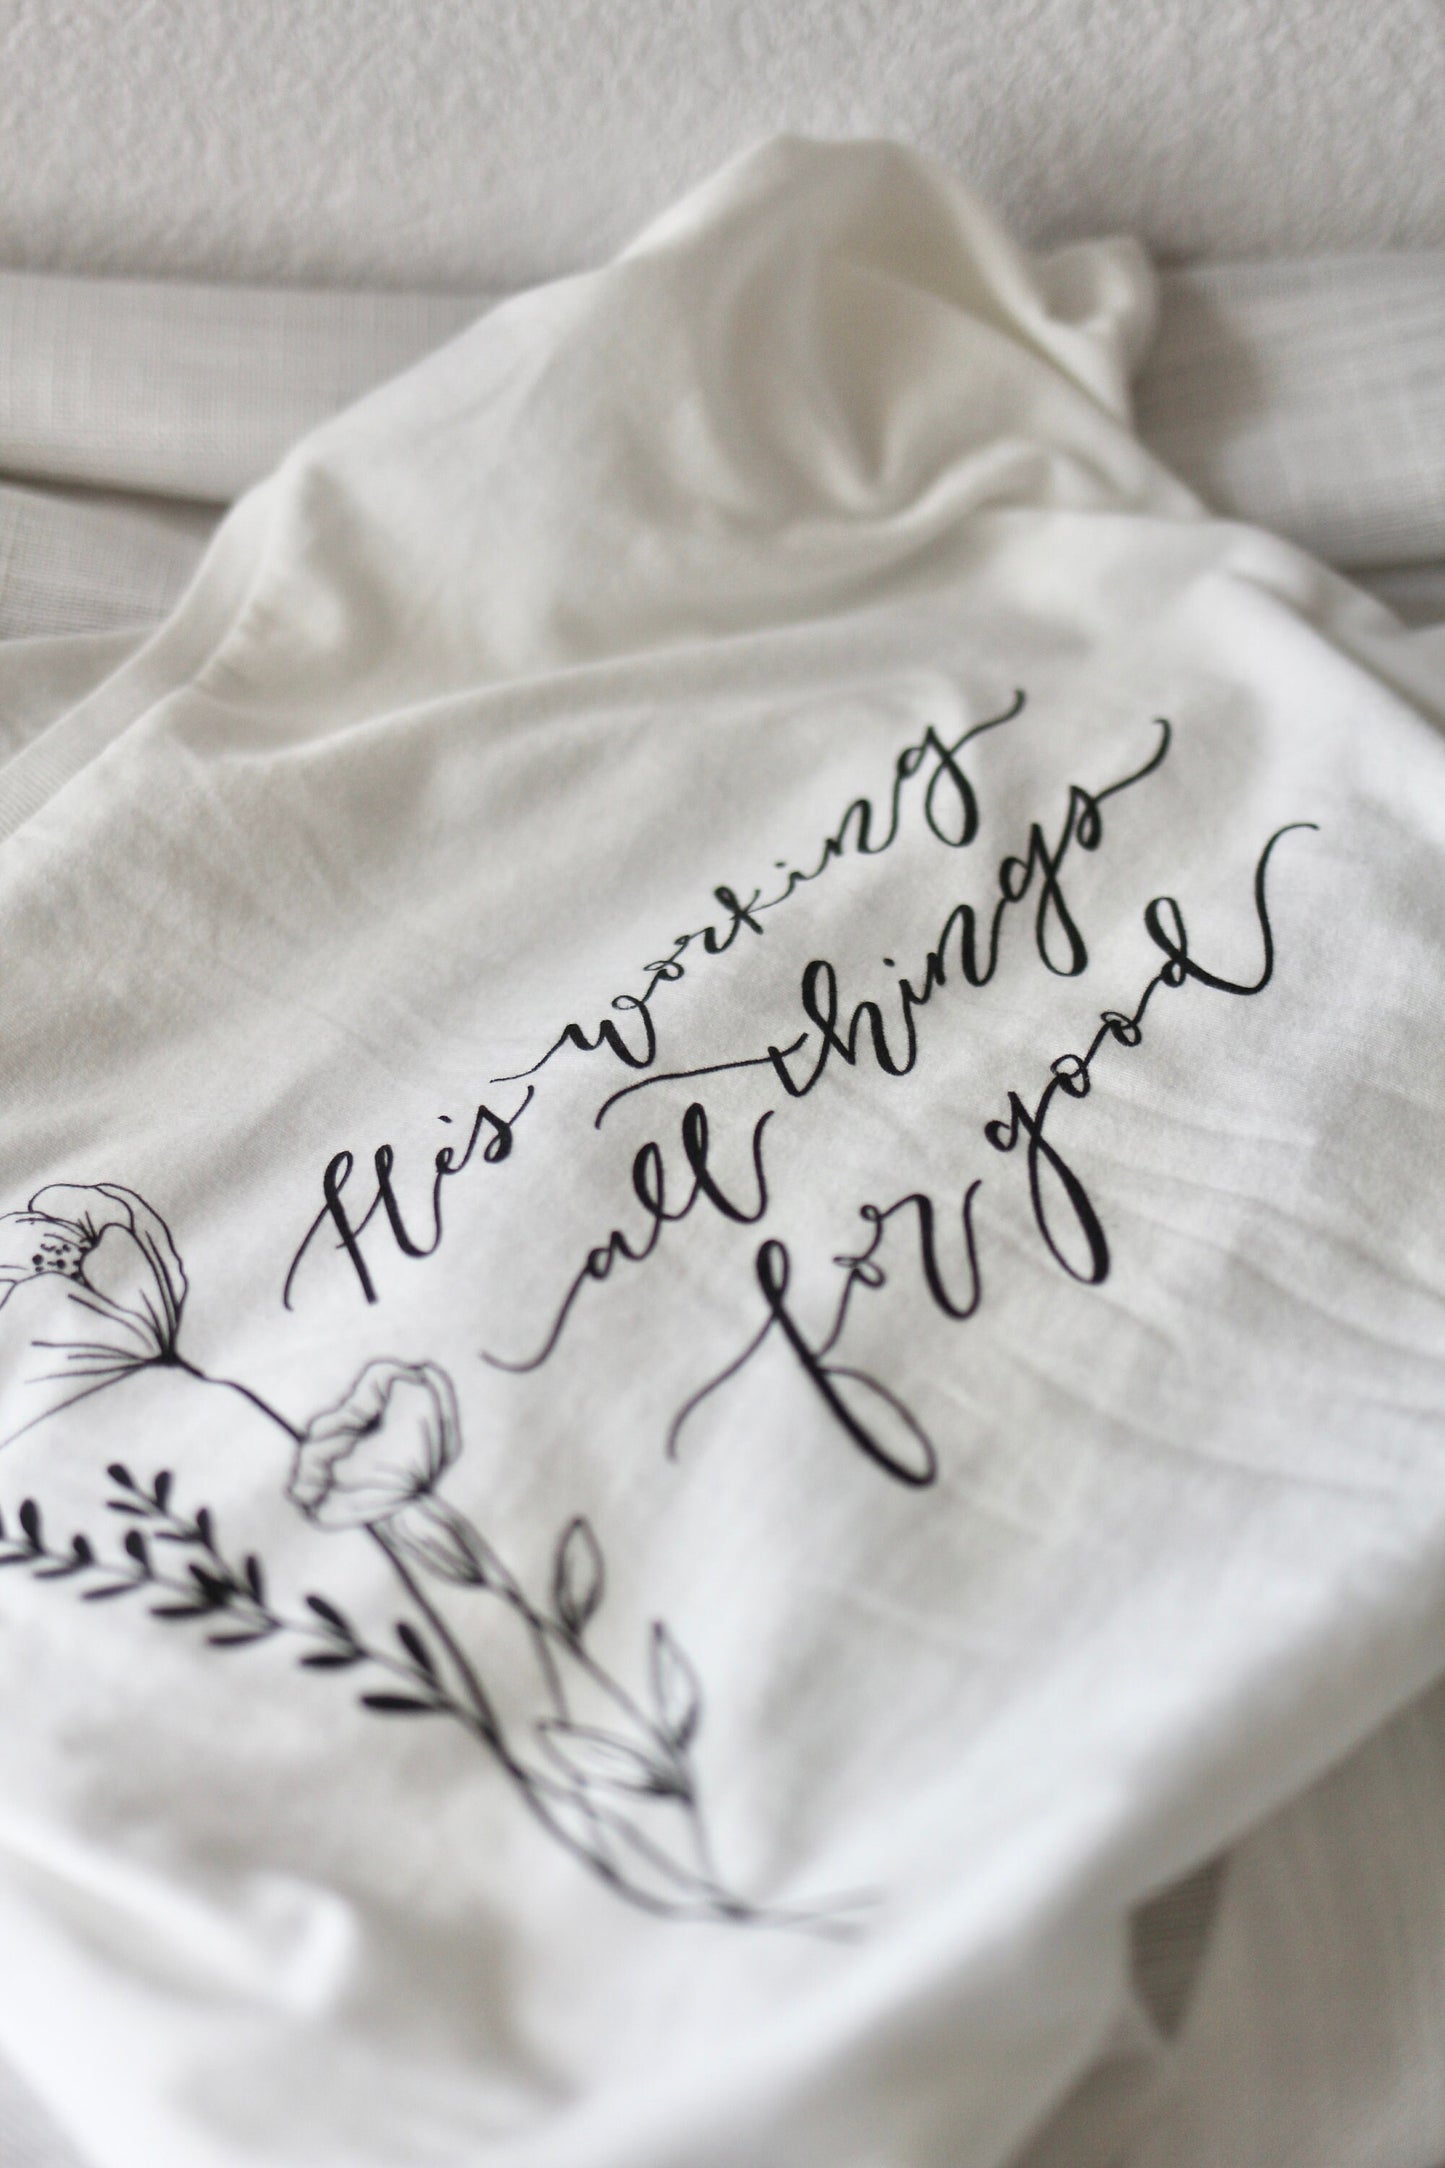 Elegant white tee, women's fit | "He's working all things for good" | Florals + hand lettering |